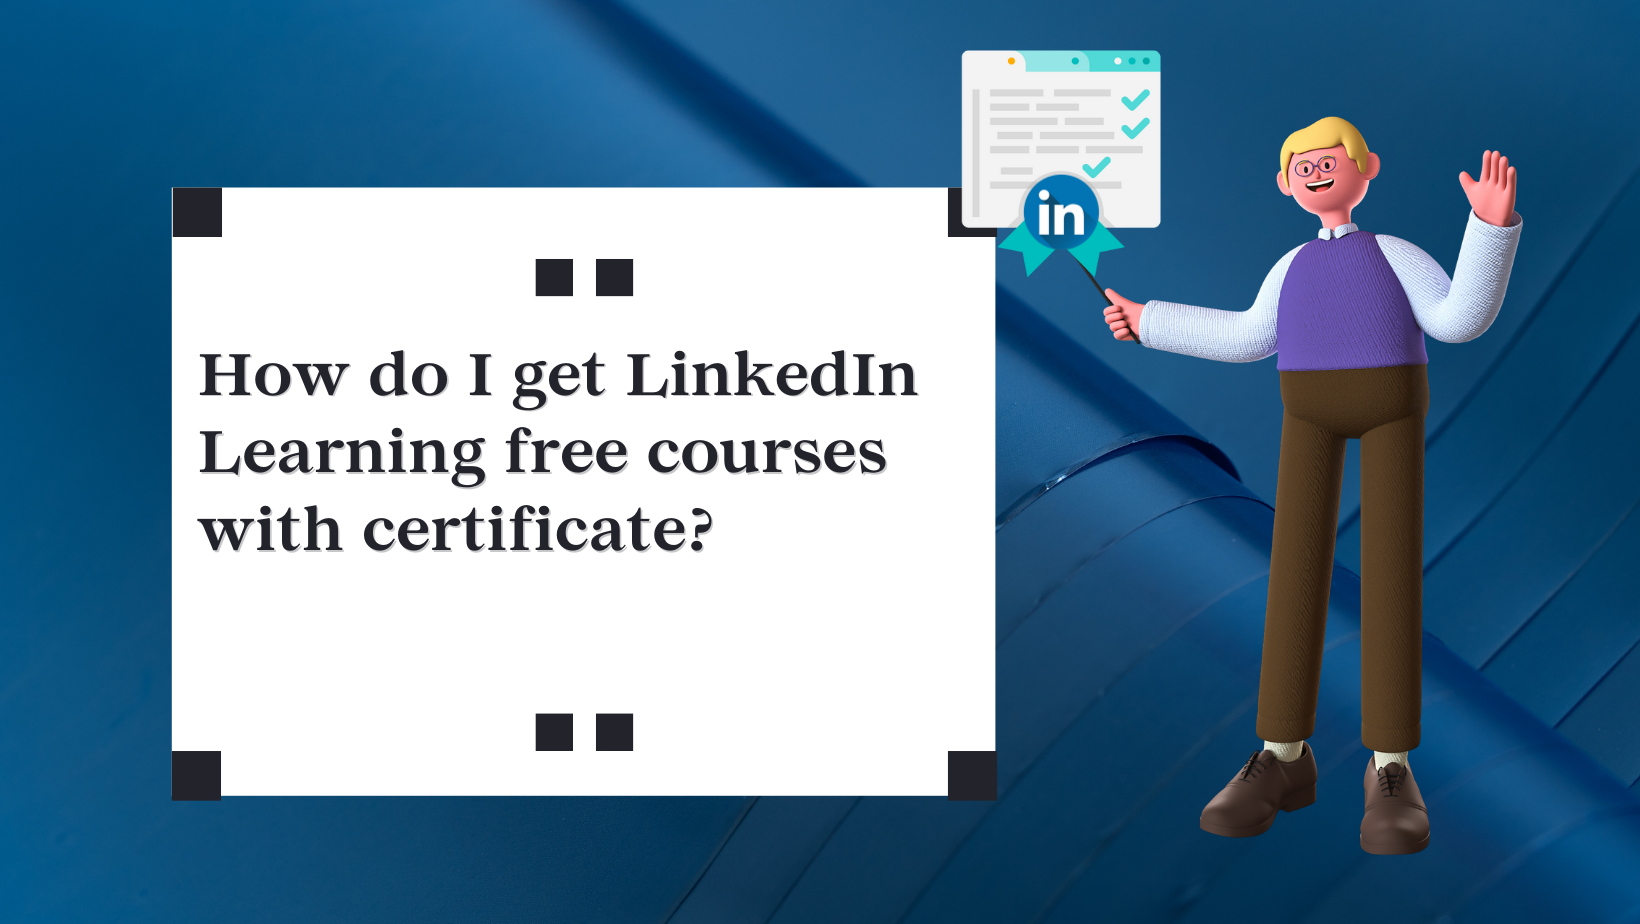 How do I get LinkedIn Learning free courses with certificate?